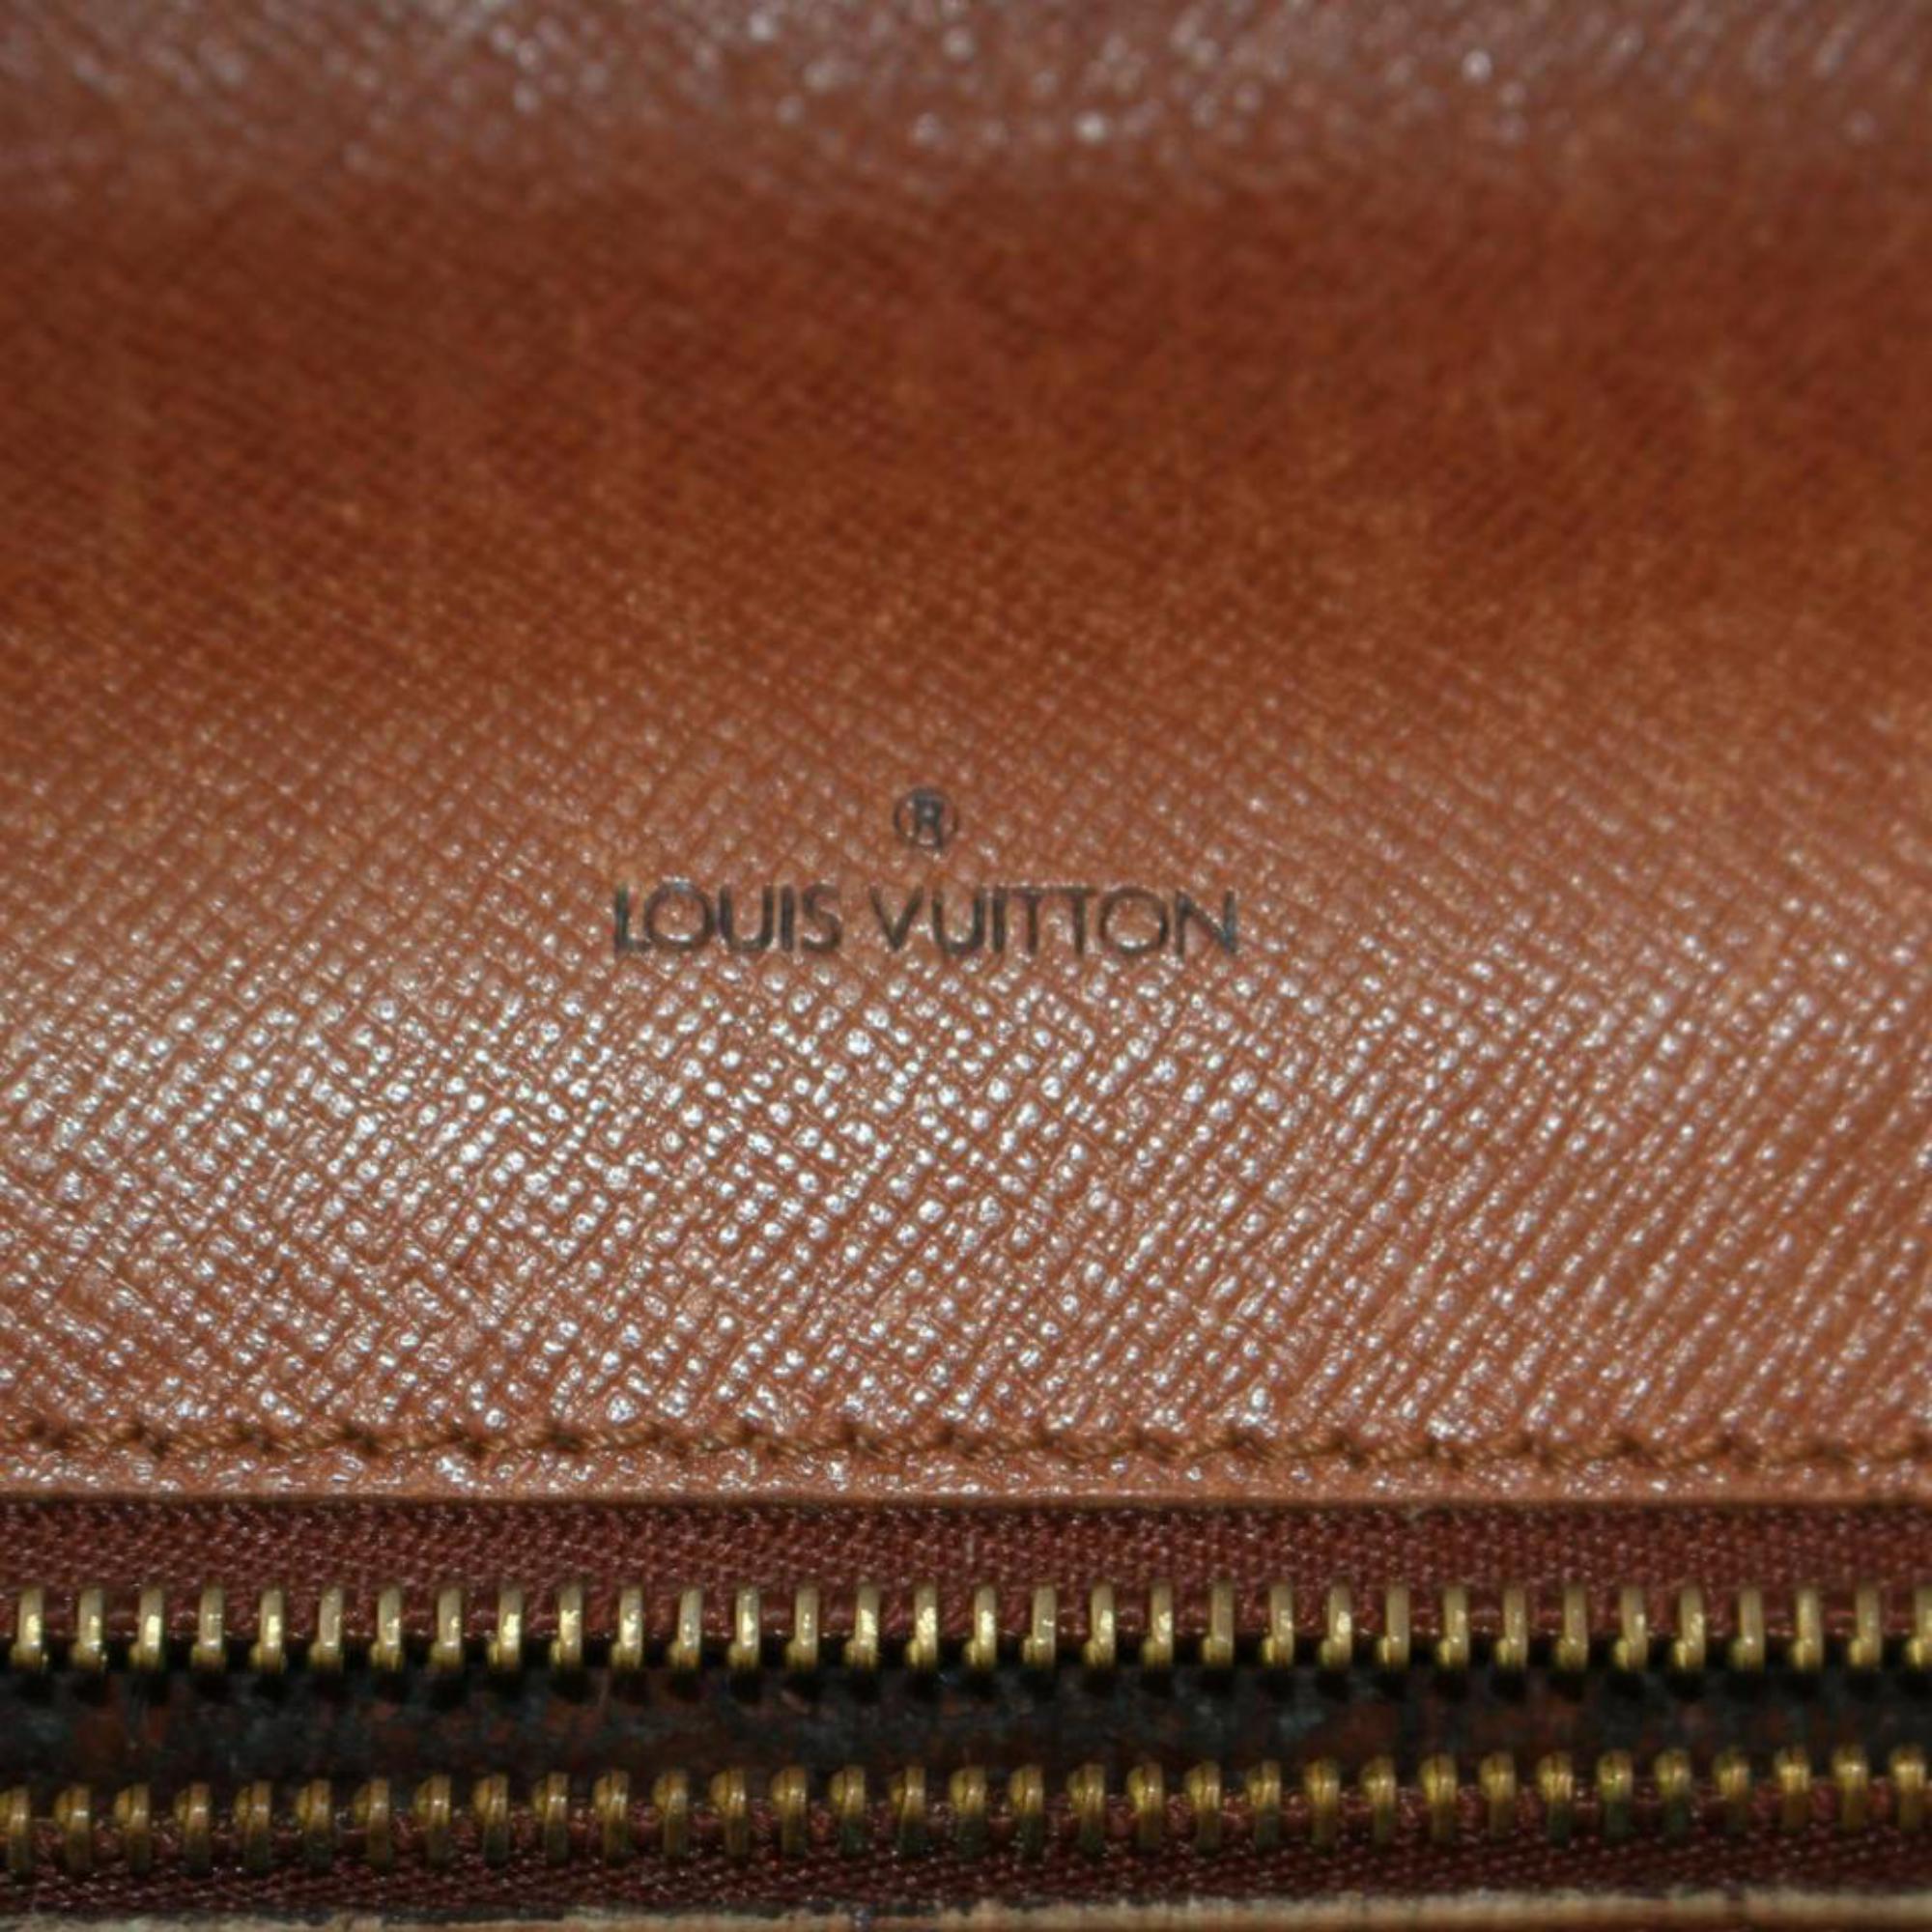 Louis Vuitton Porte  Conseiller Porte-documents Bandouliere 869924  Laptop Bag In Fair Condition For Sale In Forest Hills, NY